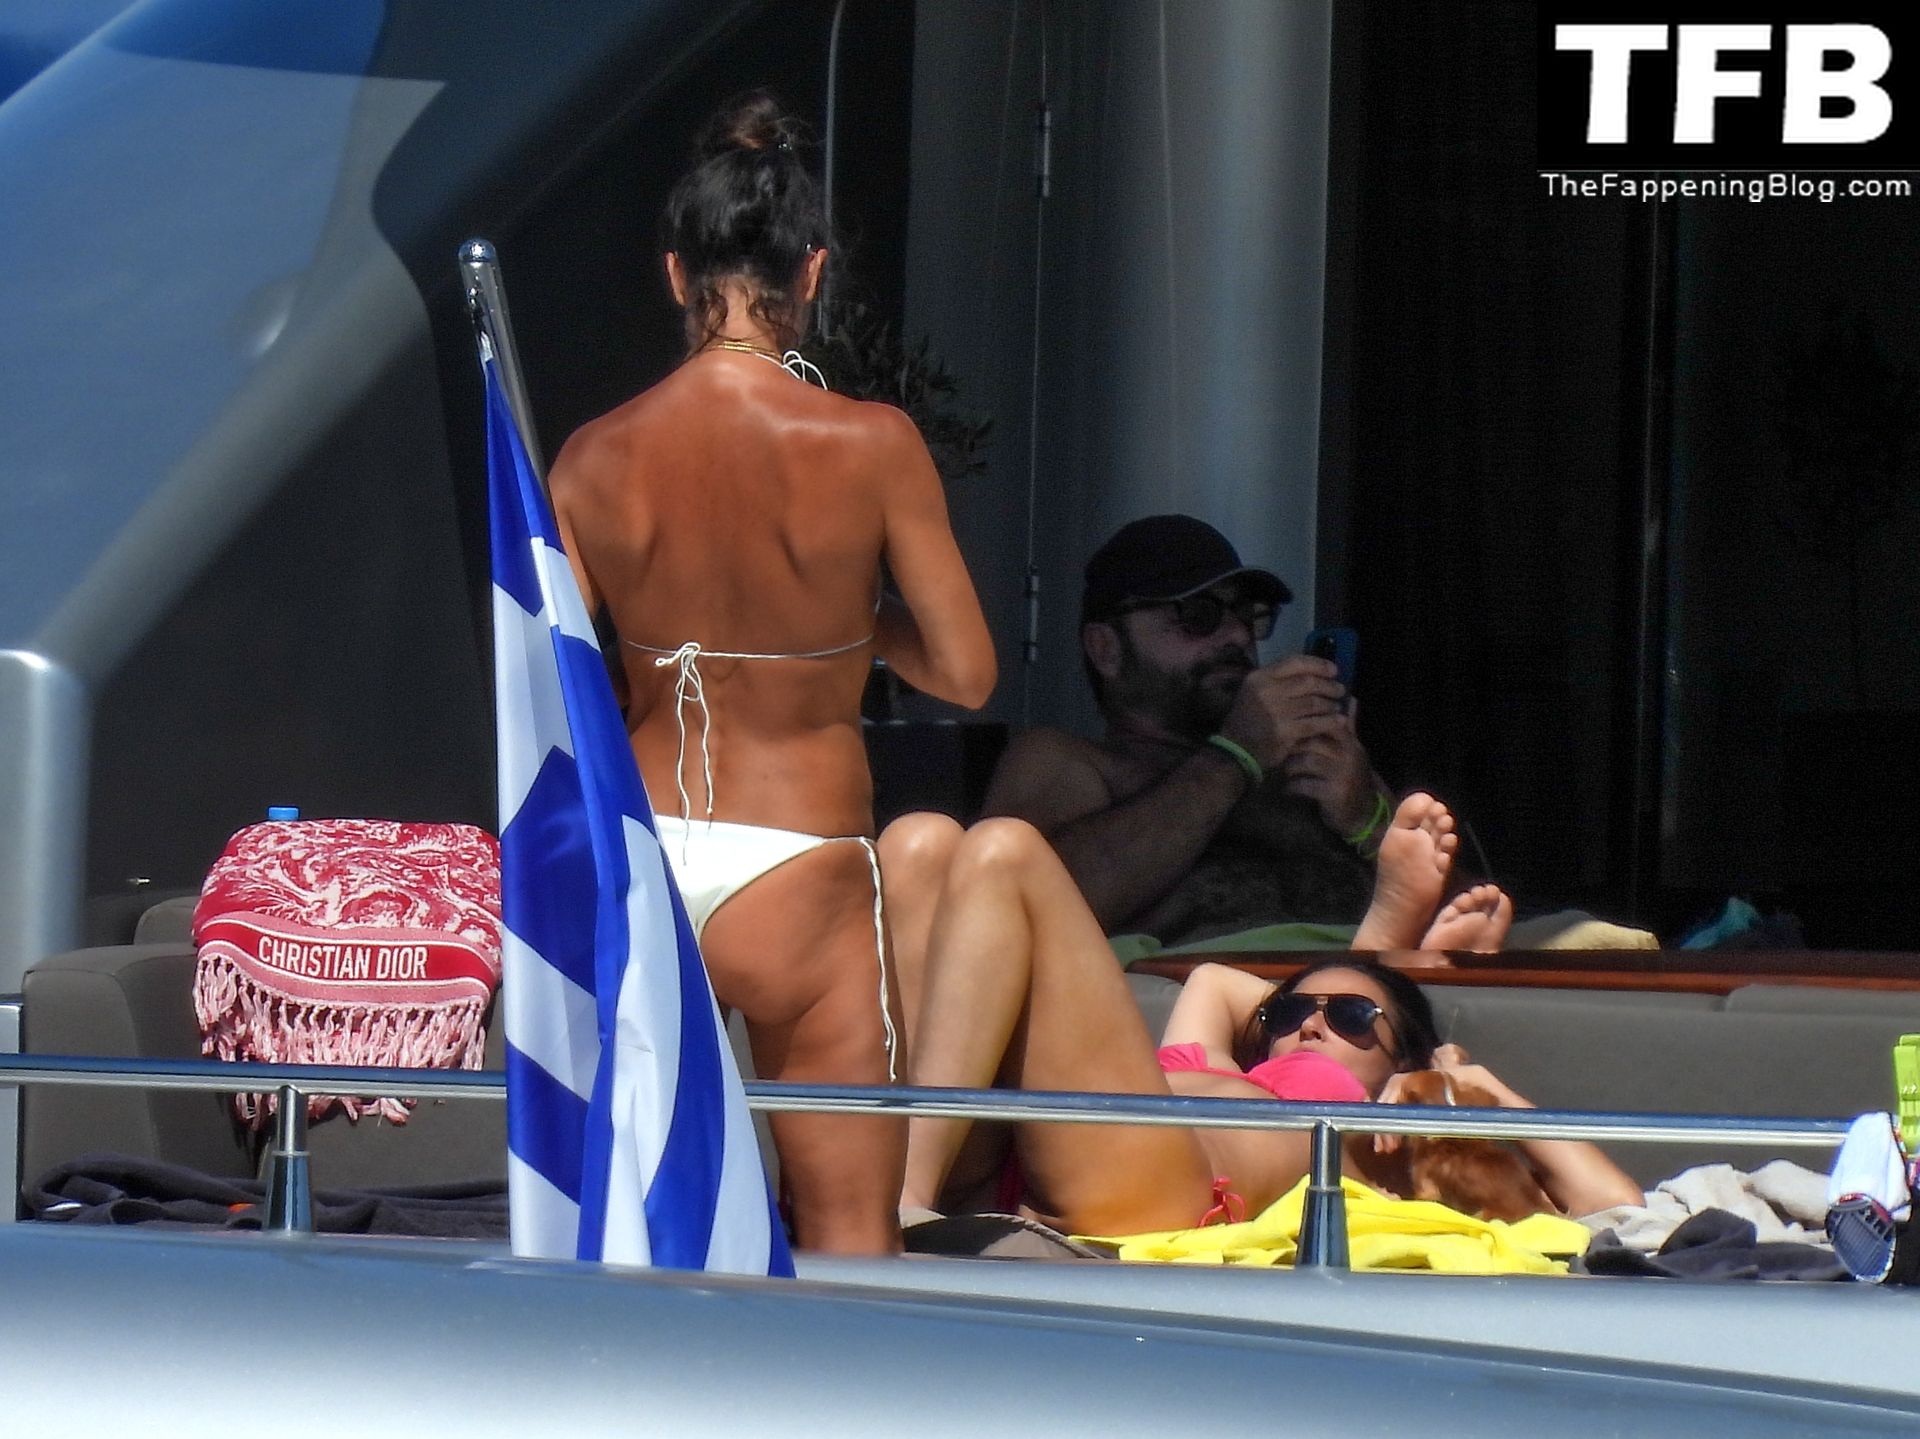 Demi Moore Sexy The Fappening Blog 35 - Demi Moore Looks Sensational at 59 in a Red Bikini on Vacation in Greece (59 Photos)